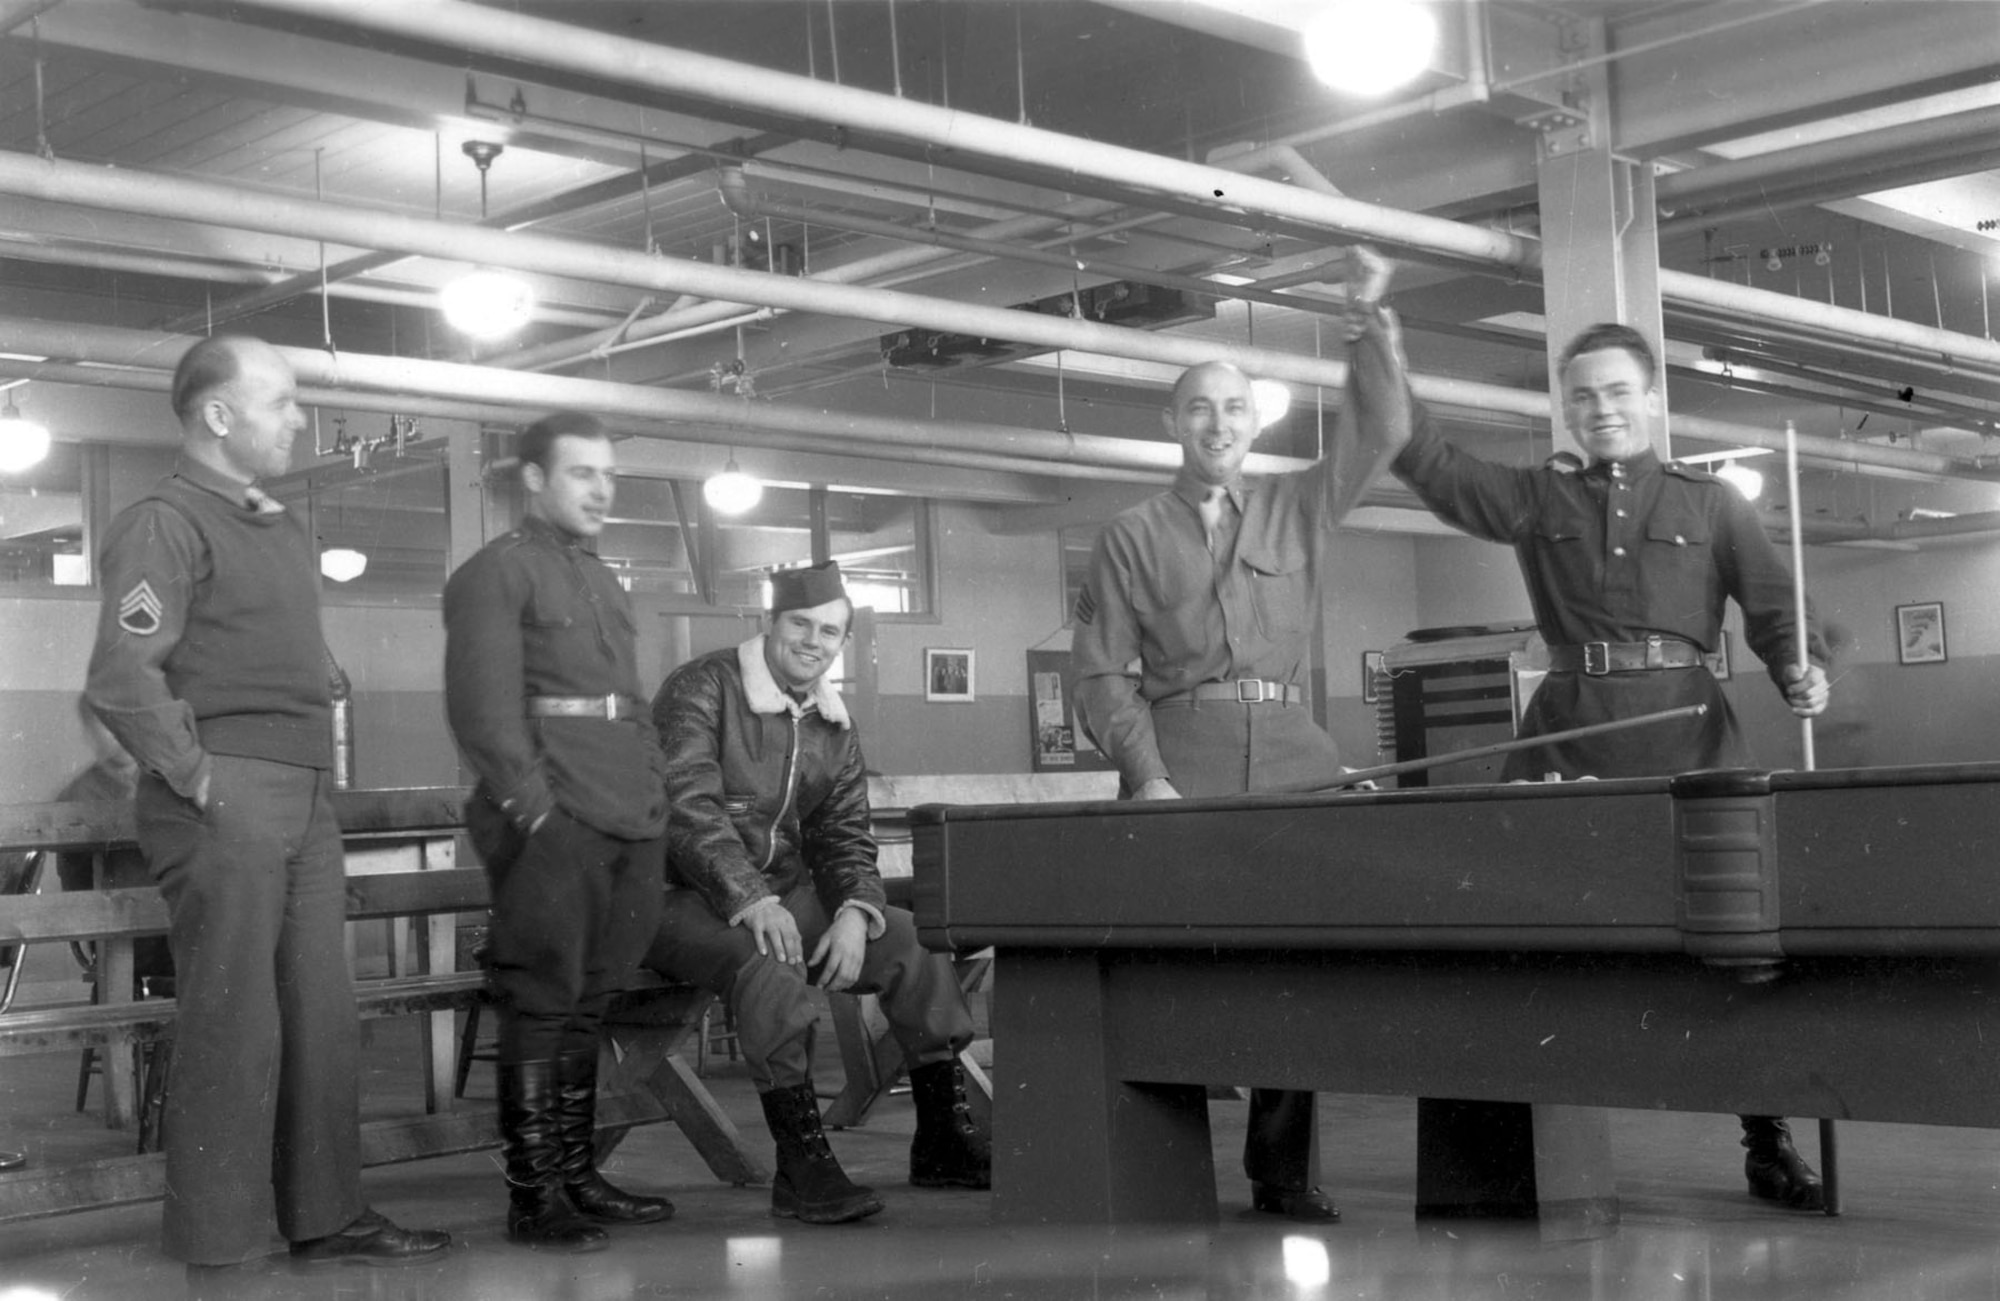 American and Soviet airmen pose during a game of billiards. This photo was taken in Alaska during American-Soviet lend-lease operations. (U.S. Air Force photo)